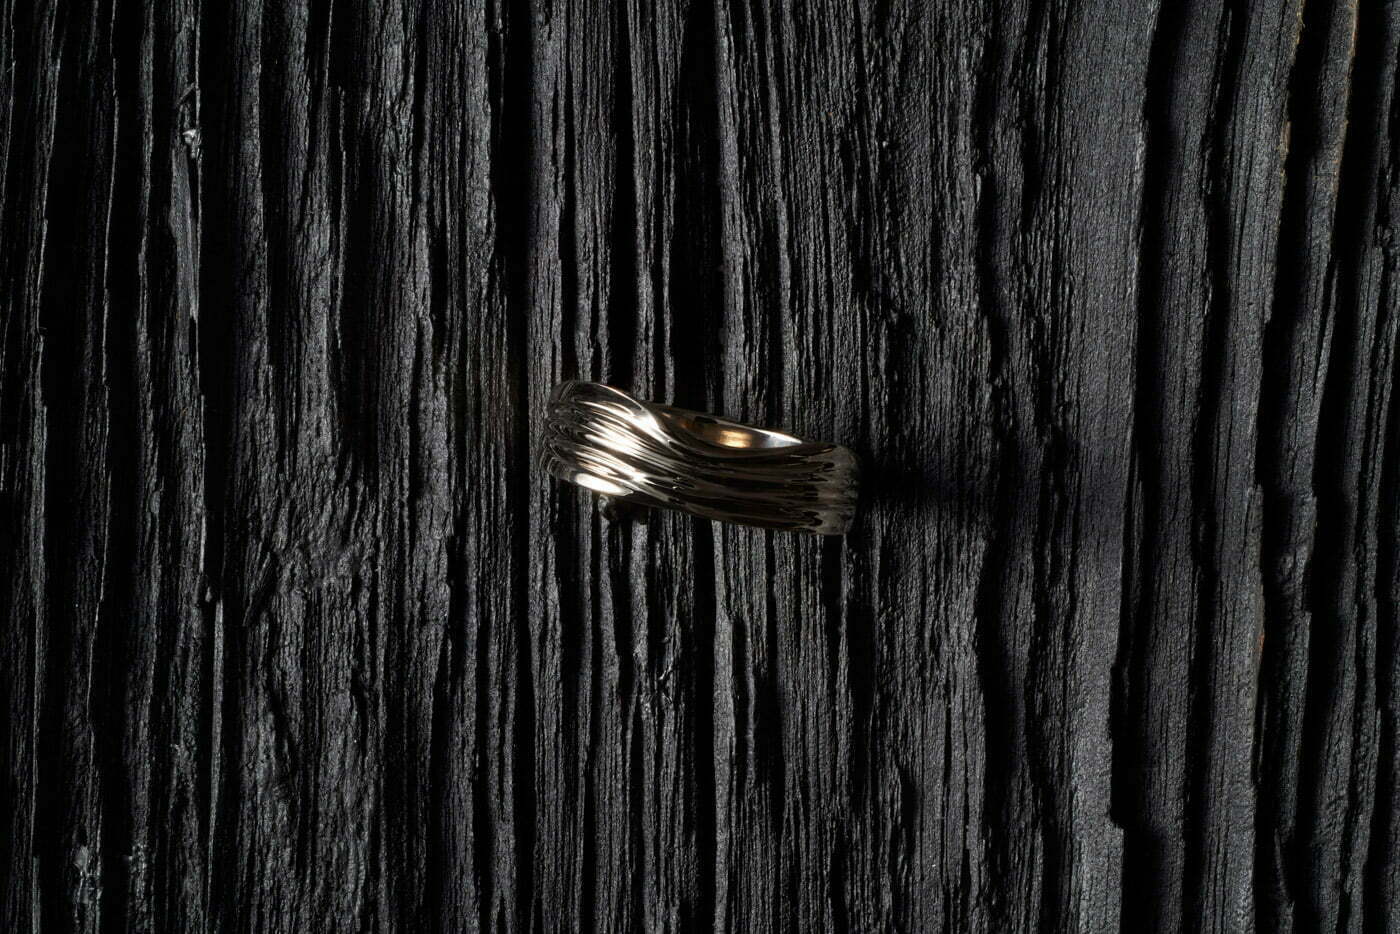 white_gold_ring_on_a_dark_wooden_background_by_Tapio_Ranta-aho